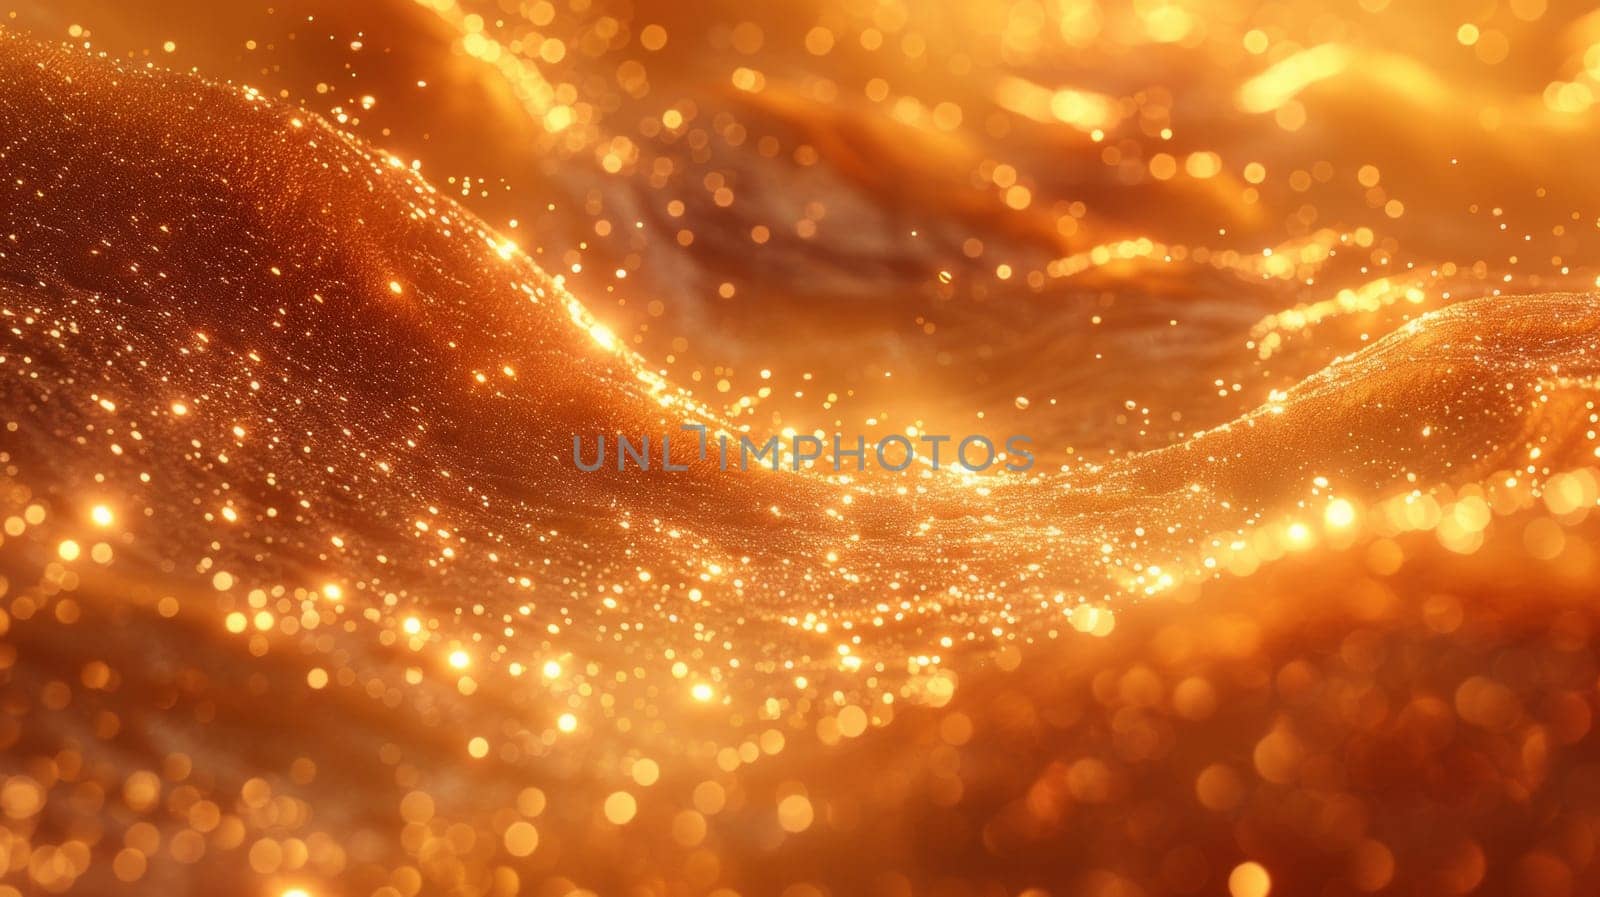 A close up of a golden liquid with sparkling lights, AI by starush